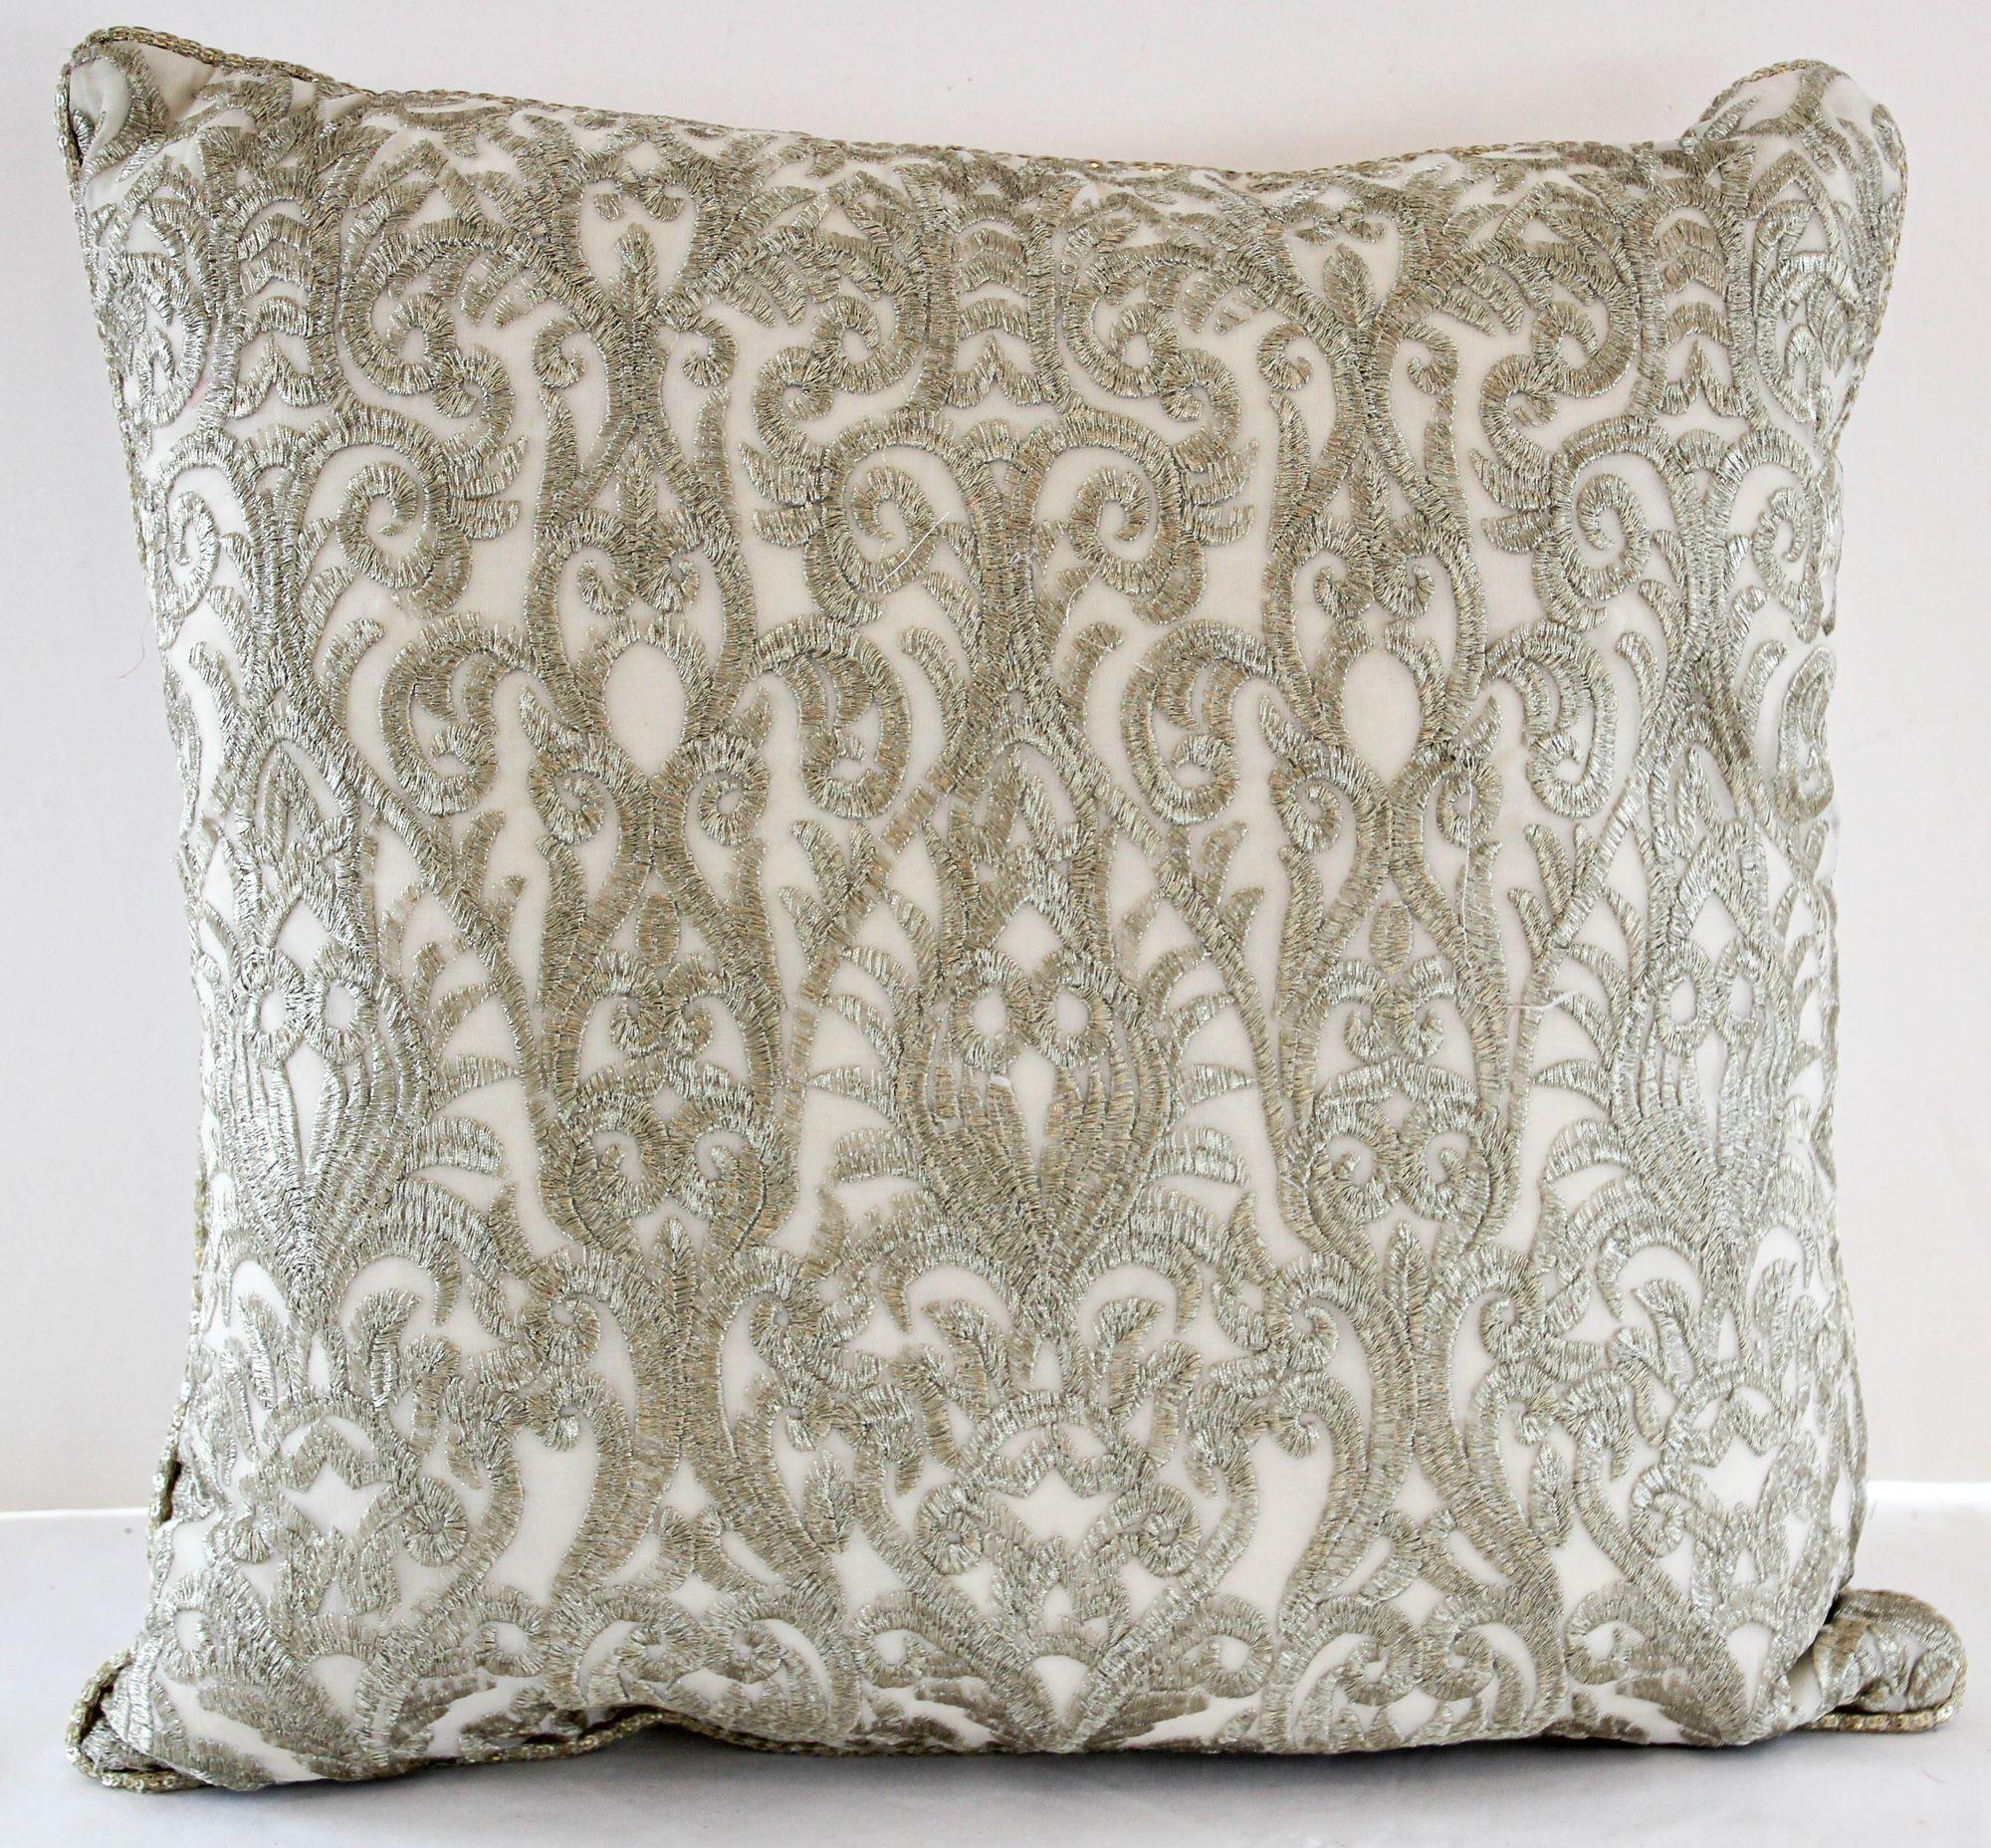 Turkish Moorish Ottoman style throw pillow with silver Metallic embroidery.
Featuring heavy foliage silver threads sarma embroidery.
Raised silver metallic embroidery bordered with silver metallic beads galon on linen fabric. 
Rectangle shape and